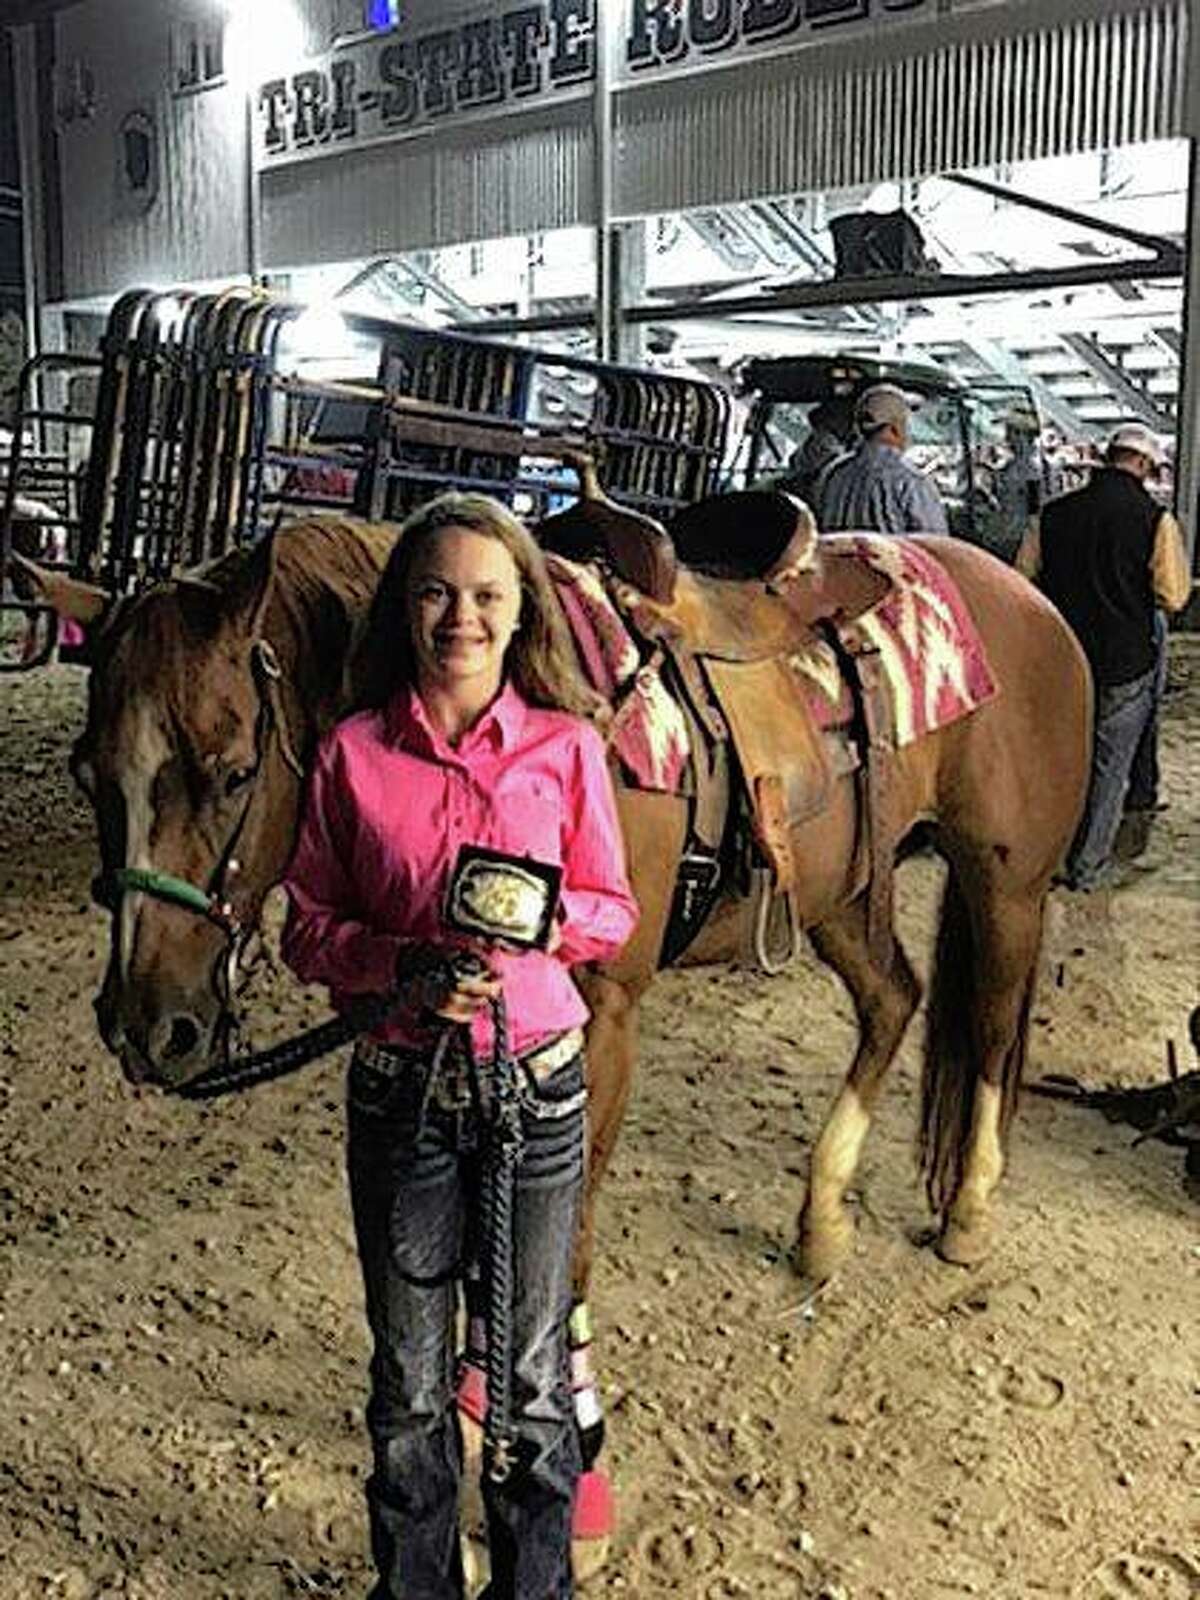 Emma Brown of Winchester finished fourth out of 26 participants in the qualifying round of the Pee-wee Barrels at the Tri-State Rodeo in Fort Madison, Iowa, and sixth overall at the rodeo. She is the daughter of Tim and Shelia Brown.